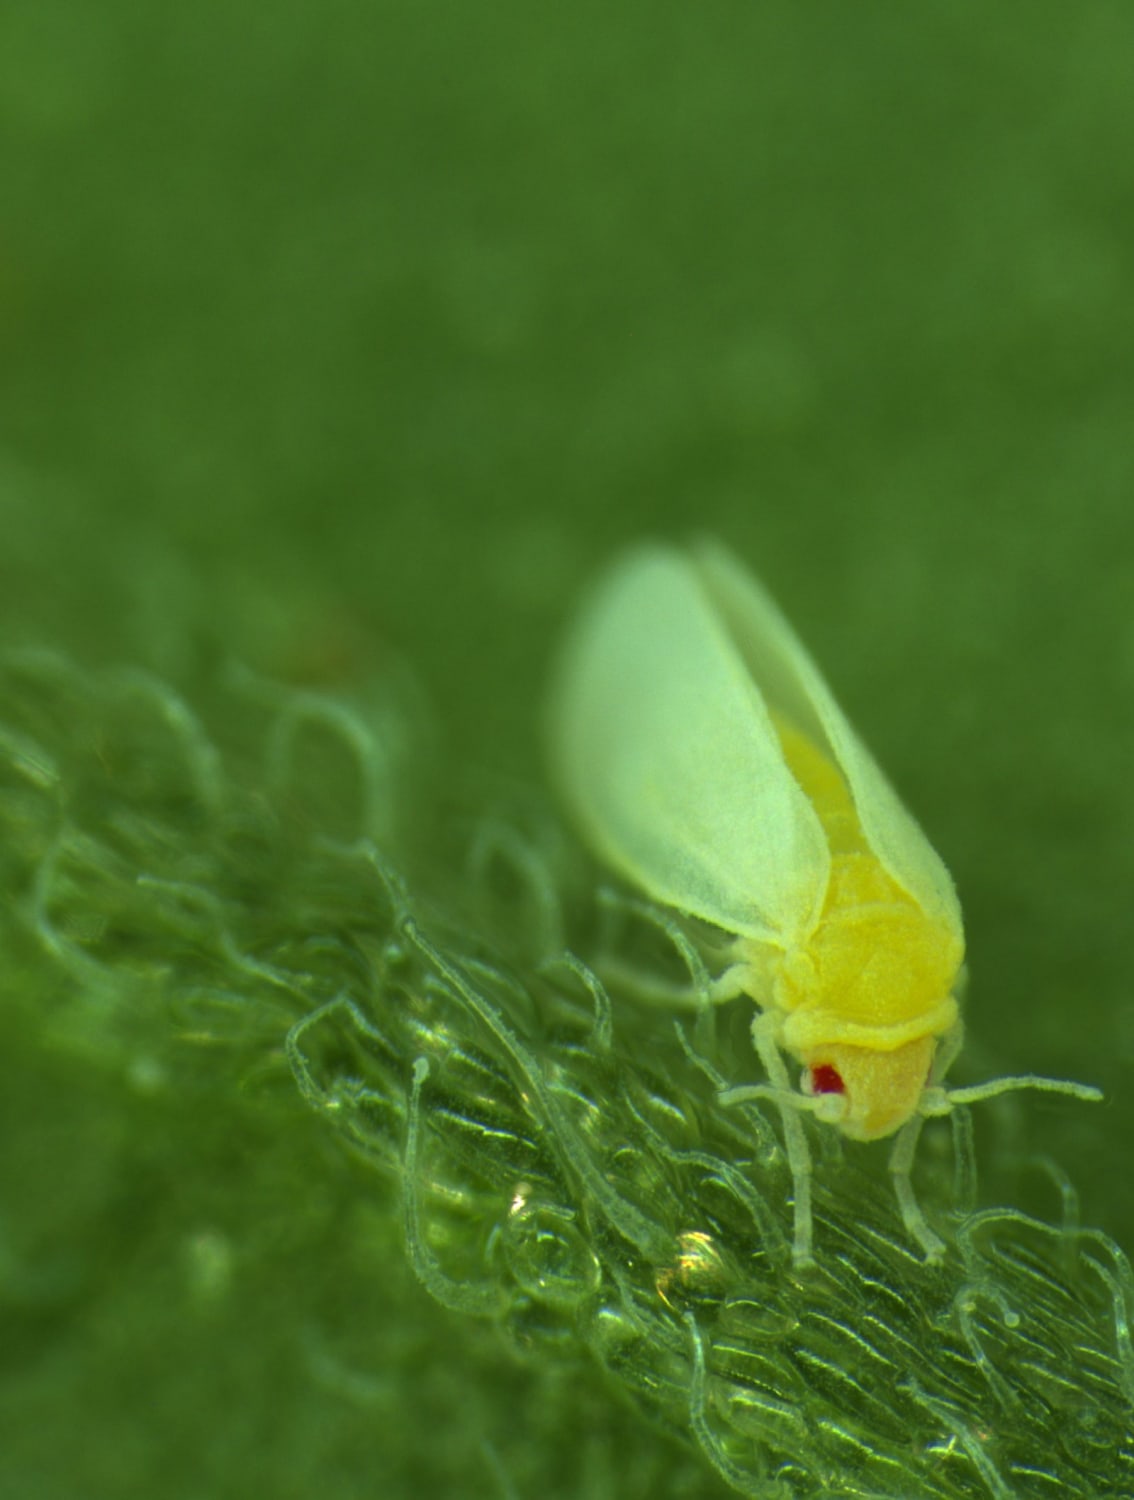 This Insect Has Plant DNA in Its Genome